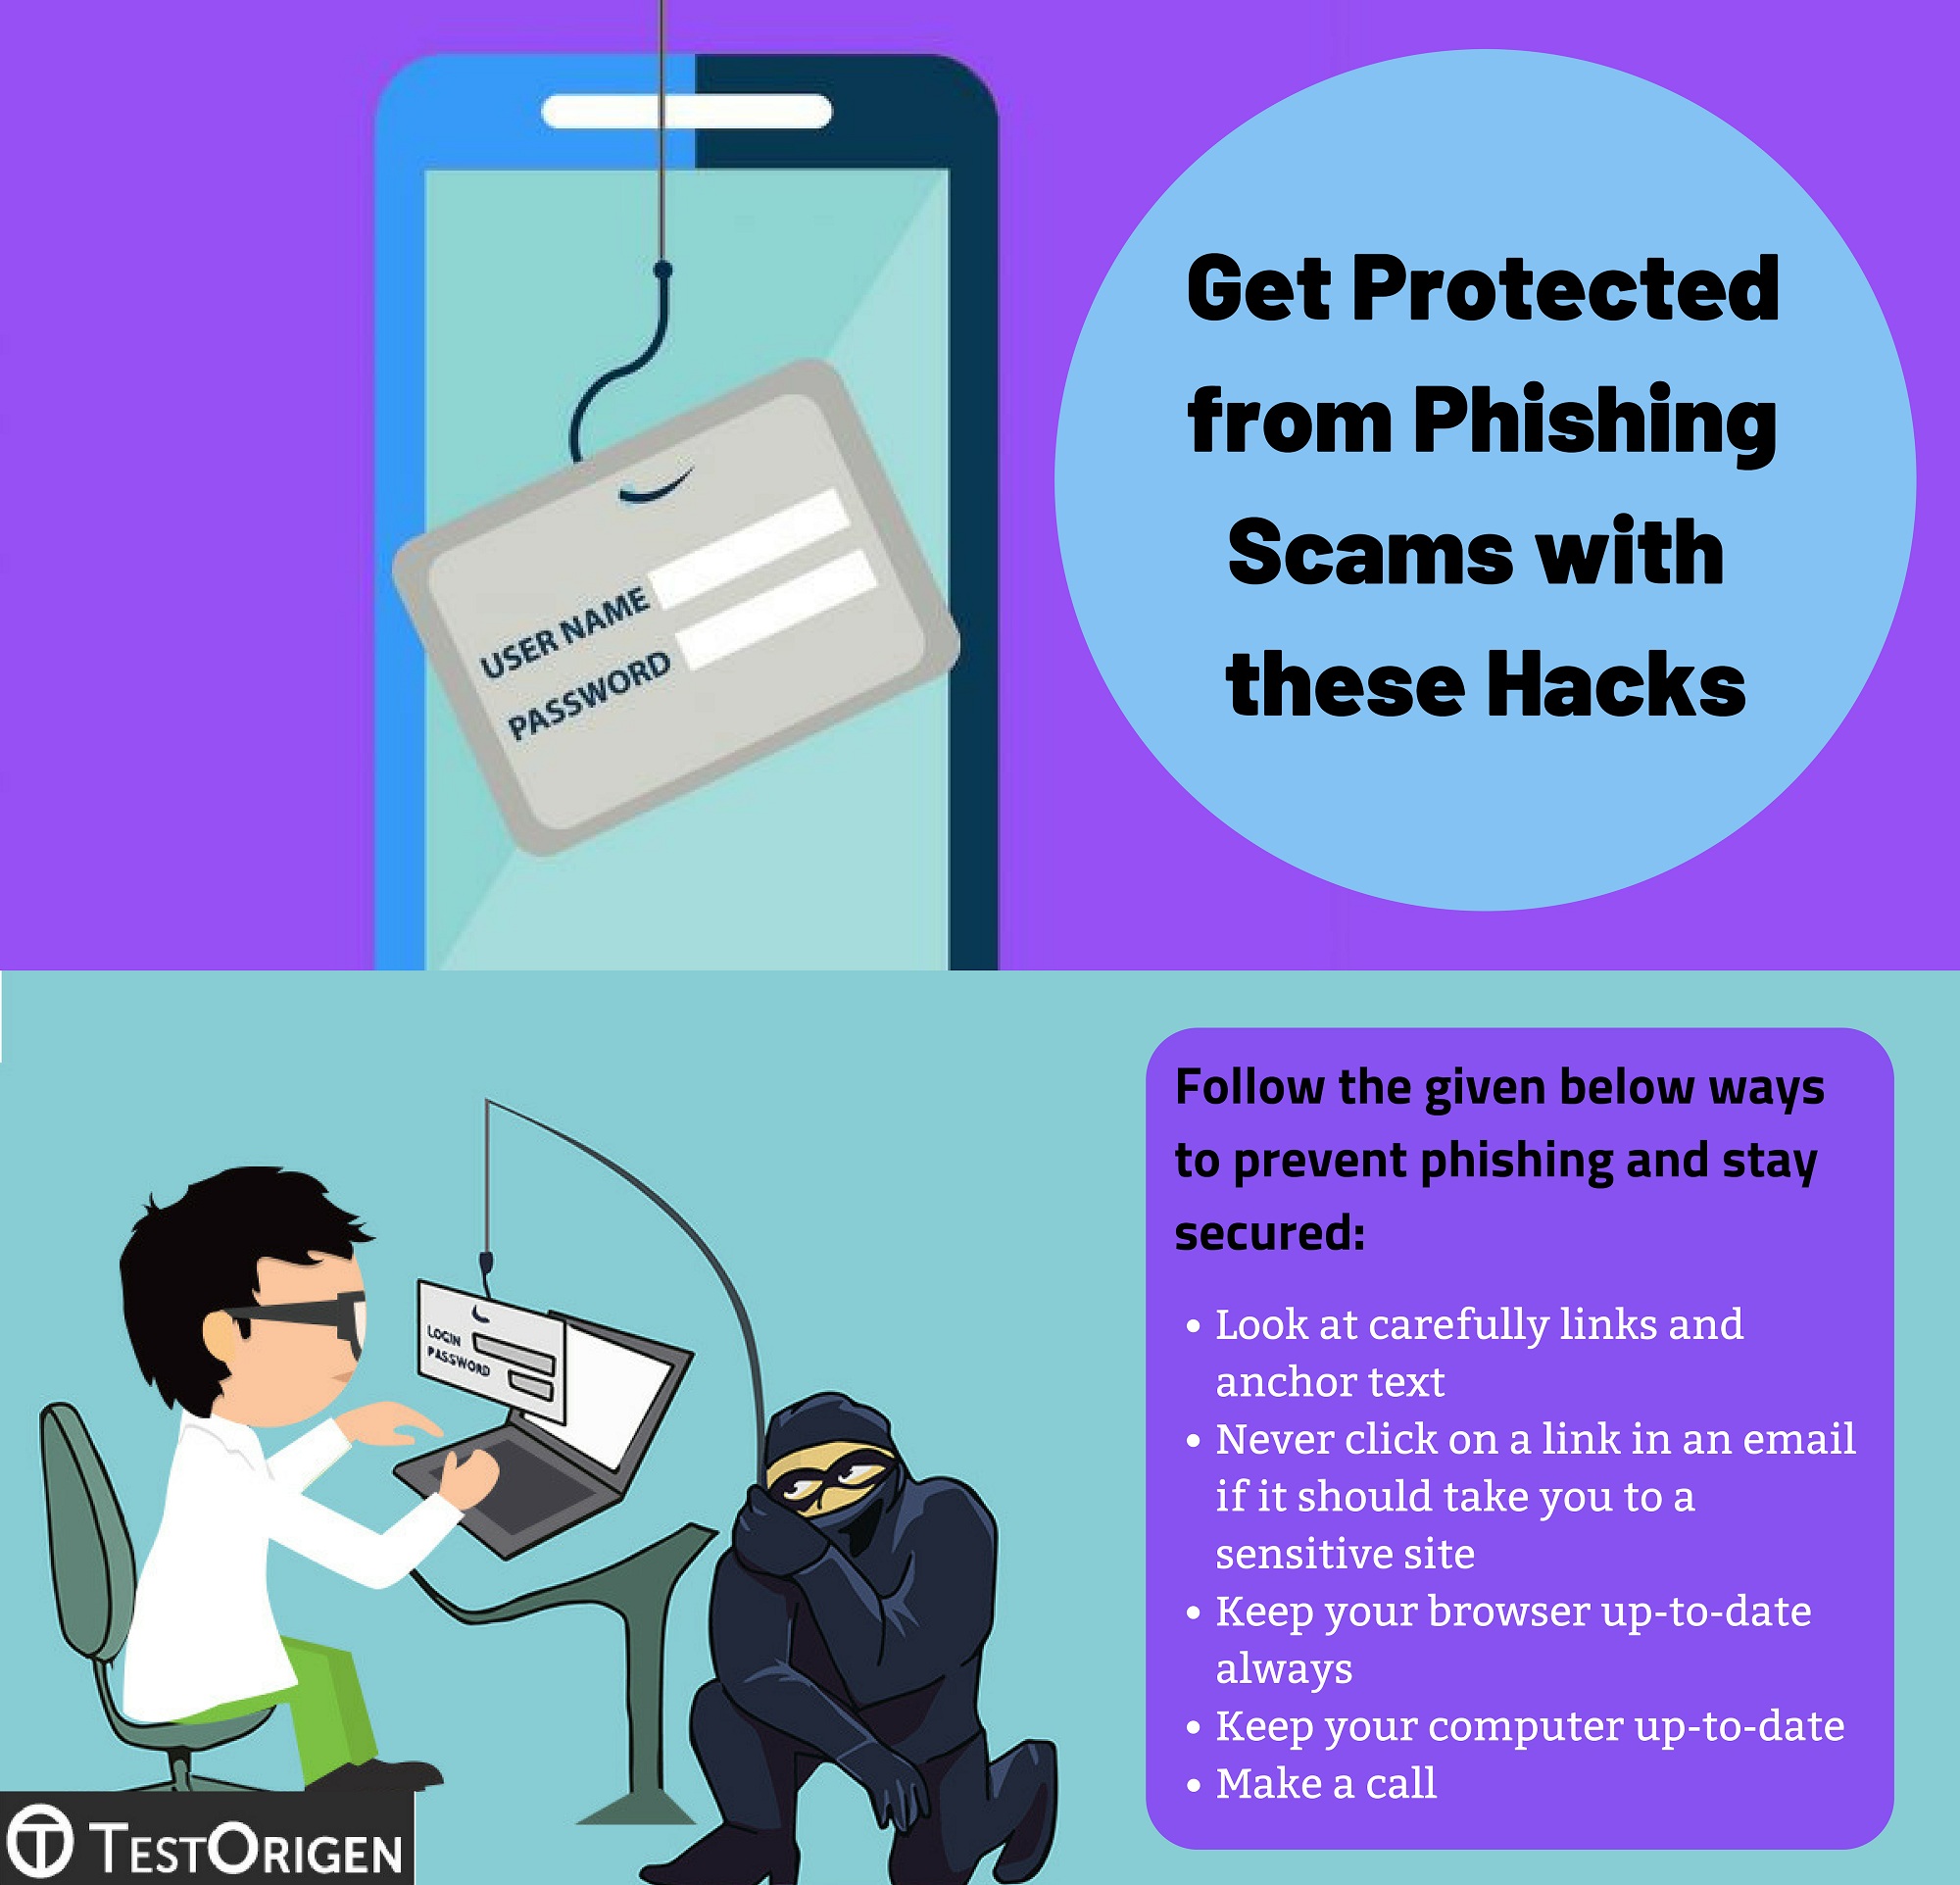 Get Protected from Phishing Scams with these Hacks